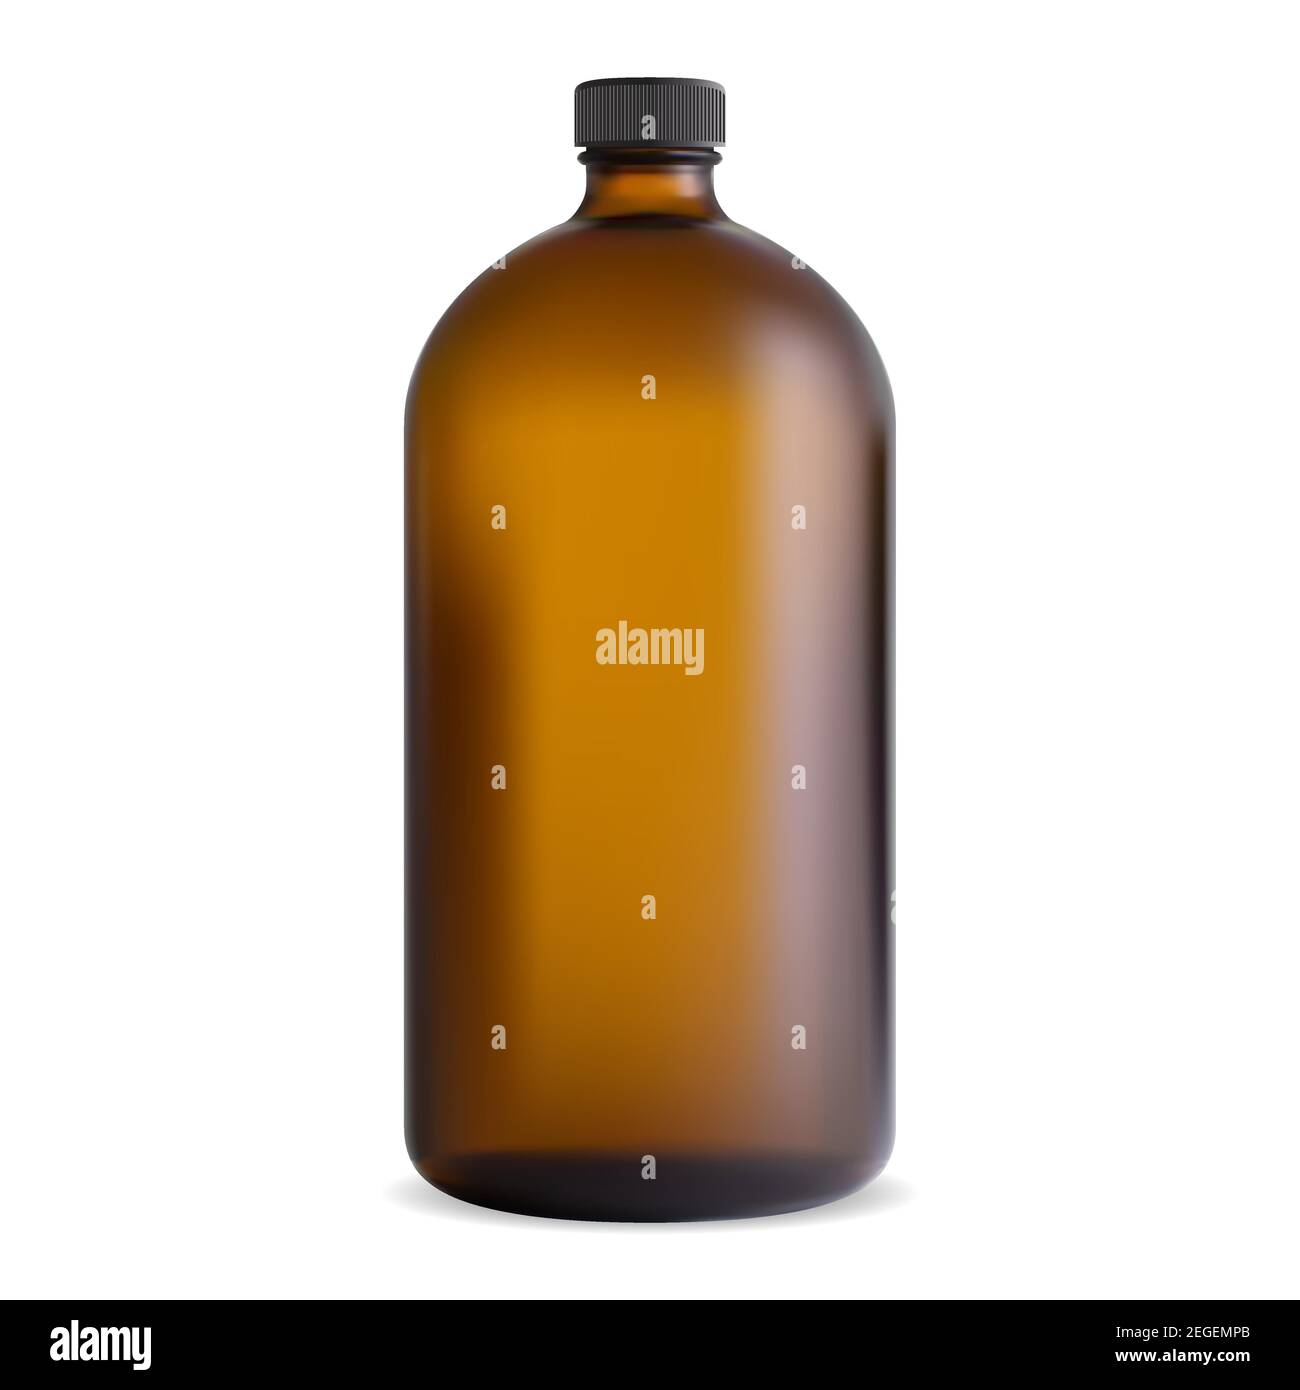 Brown glass bottle. Medical syrup jar. Pharmaceutical vitamin container mockup. Amber chemical template with screw cap vintage design translucent 3d v Stock Vector